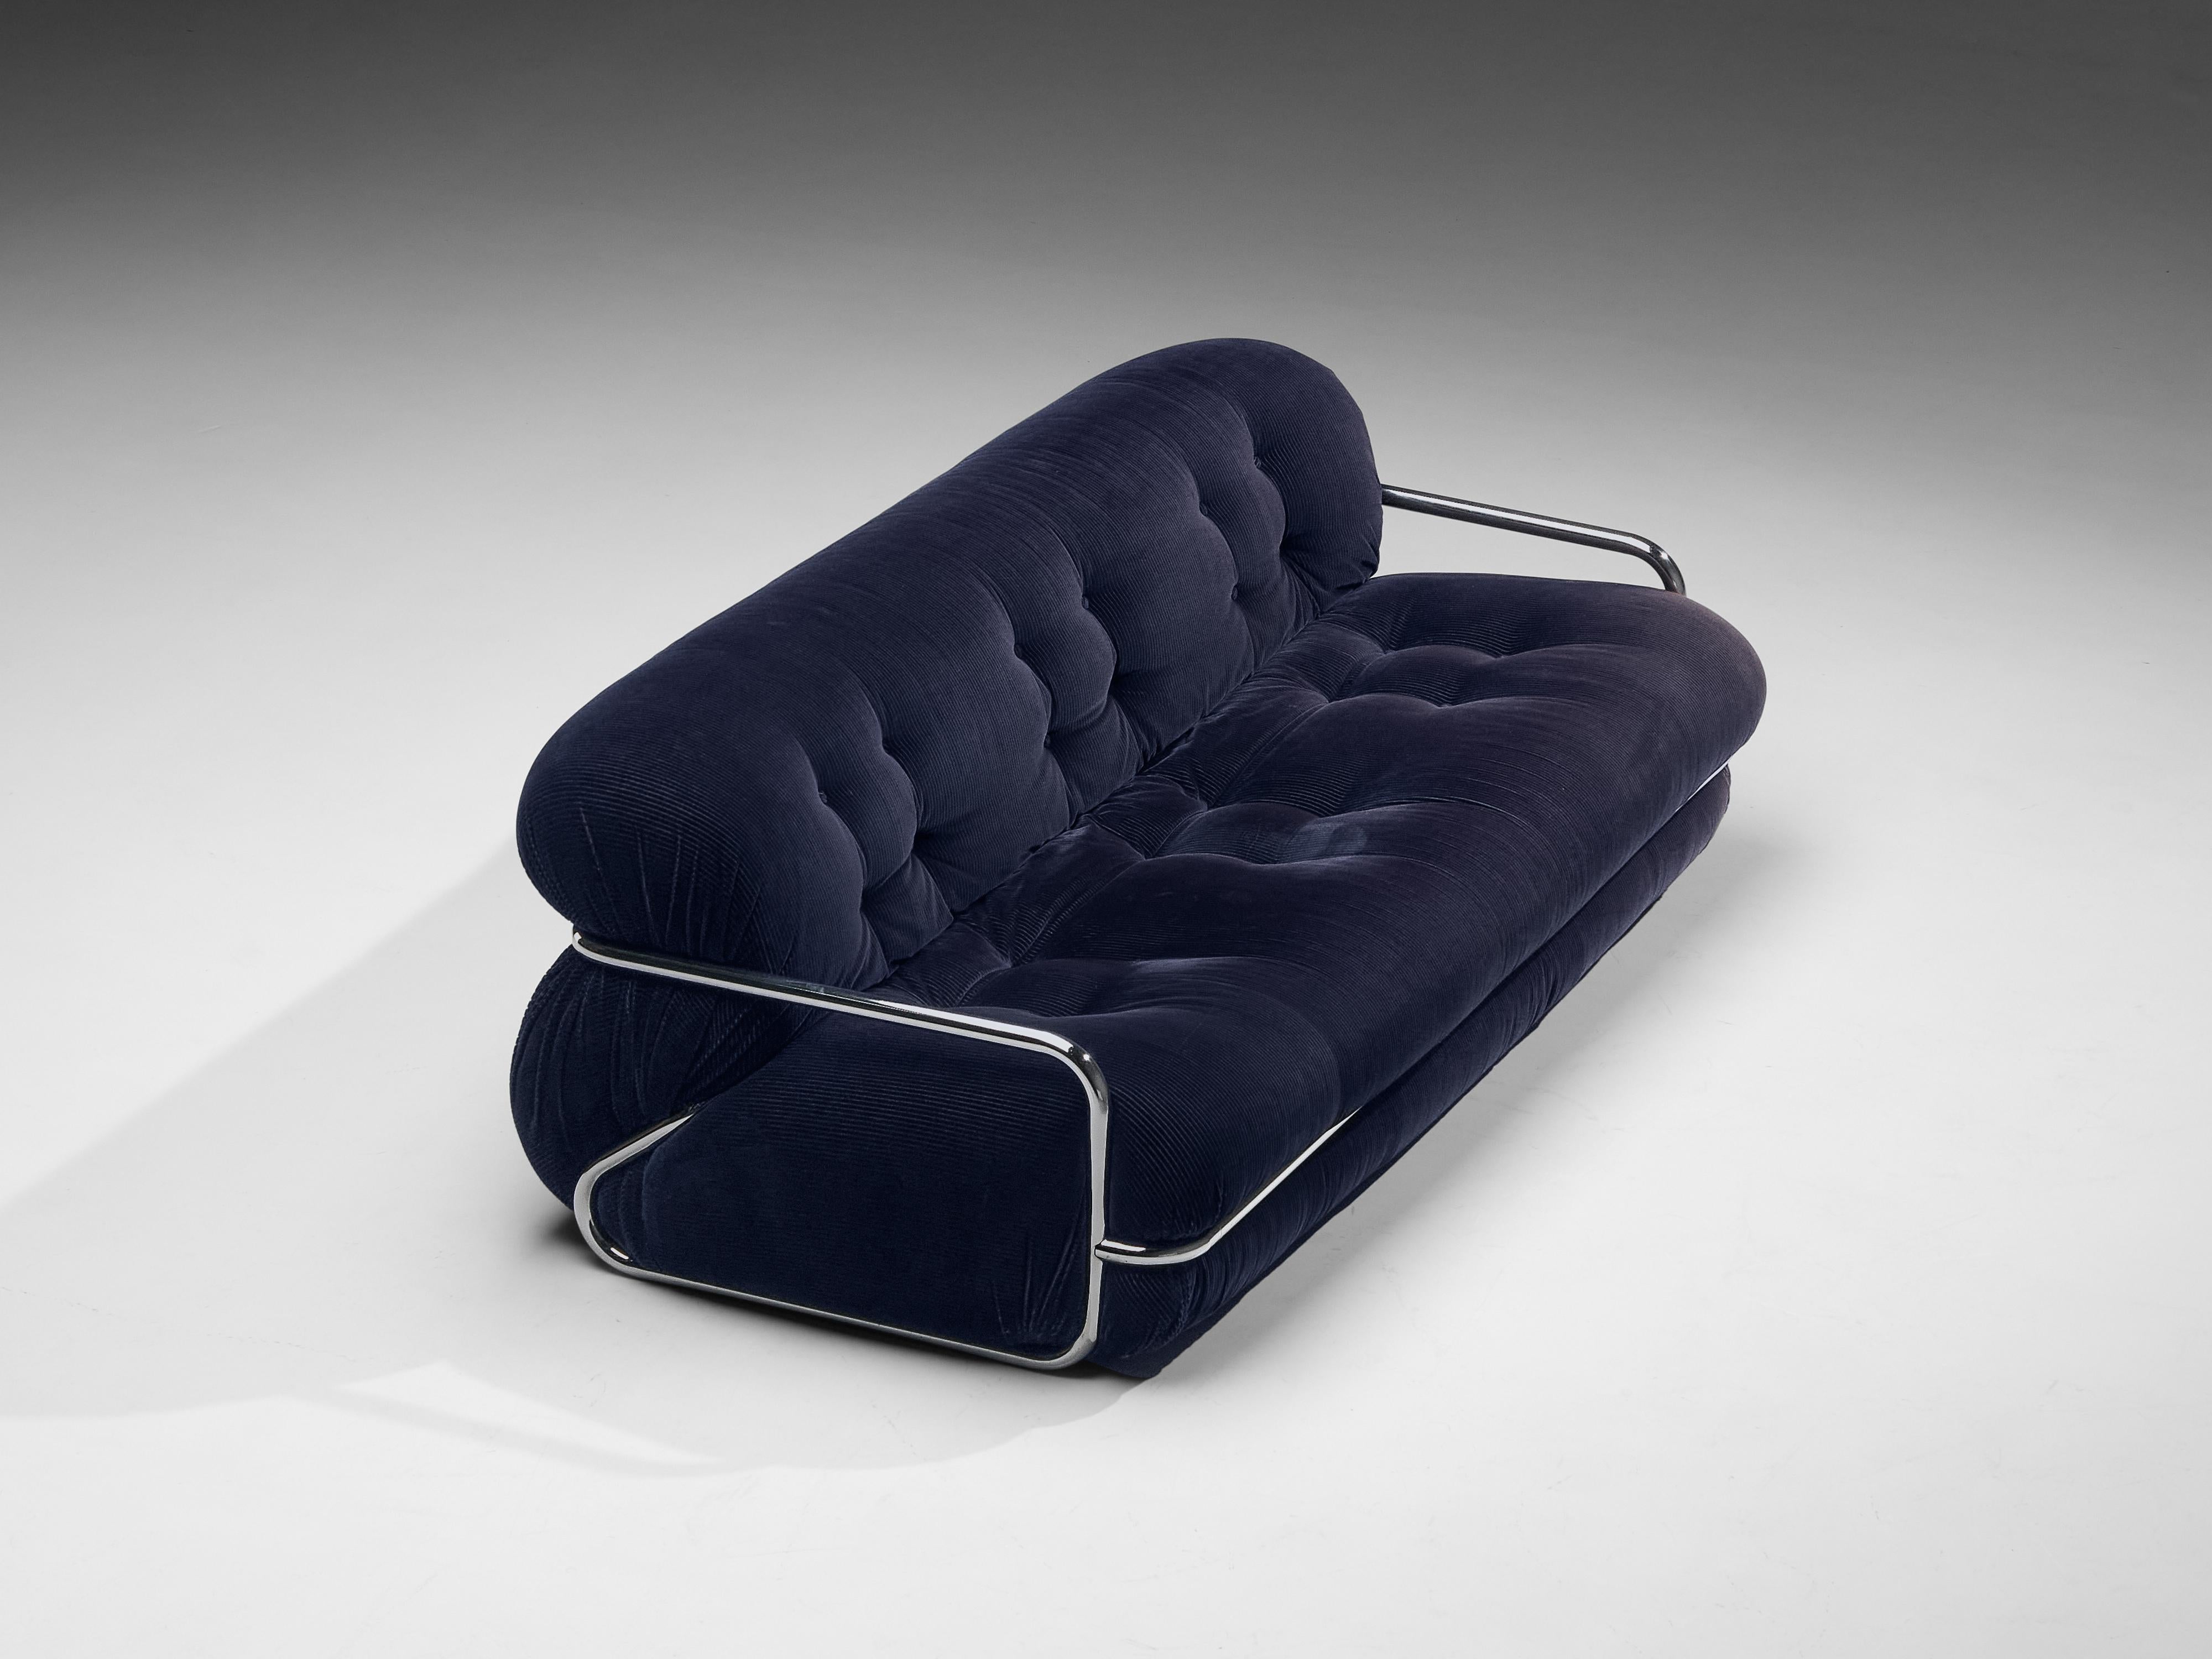 Italian sofa, chrome, corduroy, Italy, 1970s

With a strong resemblance to the Afra& Tobia Scarpa’s ‘Soriana’ sofa (1969) this model yet has distinct differences. The bulky seat and backrest upholstered in dark blue corduroy upholstery with tufted